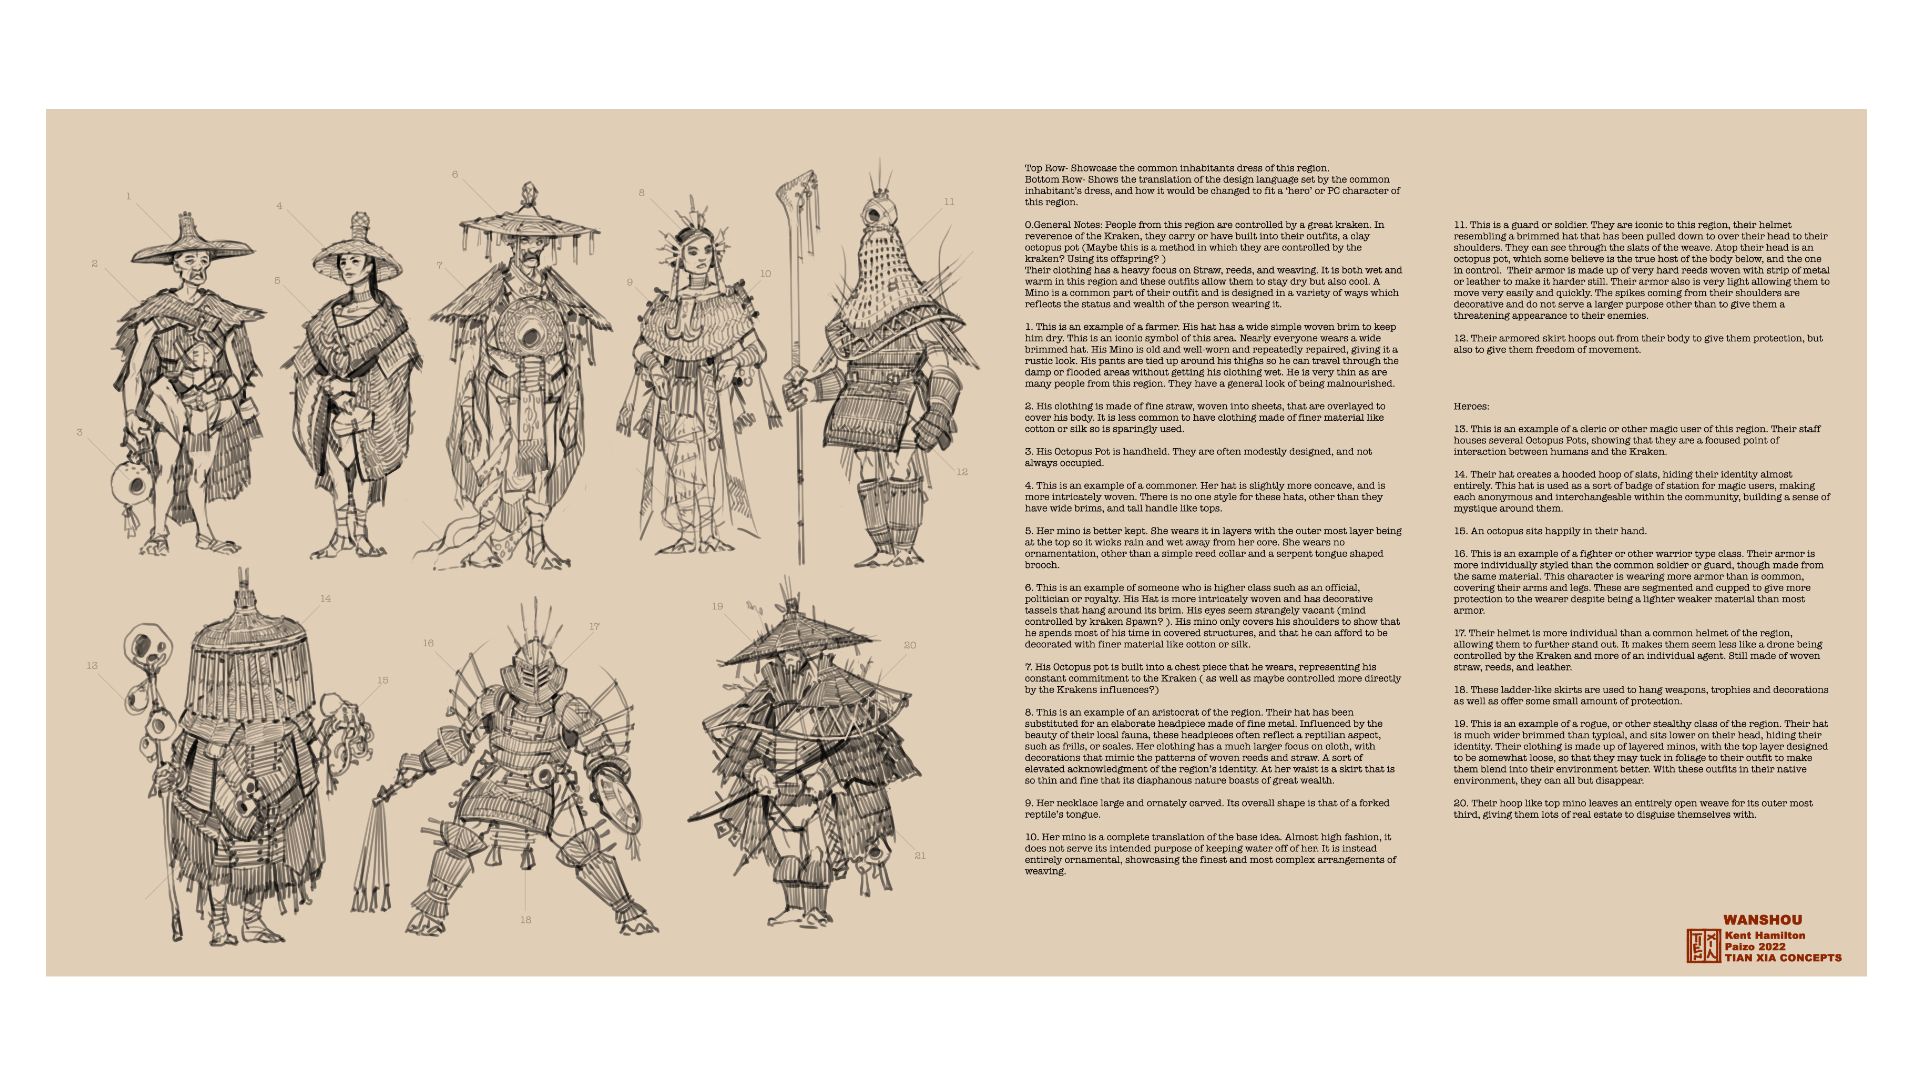 Concept art and notes for the region by Kent Hamilton.